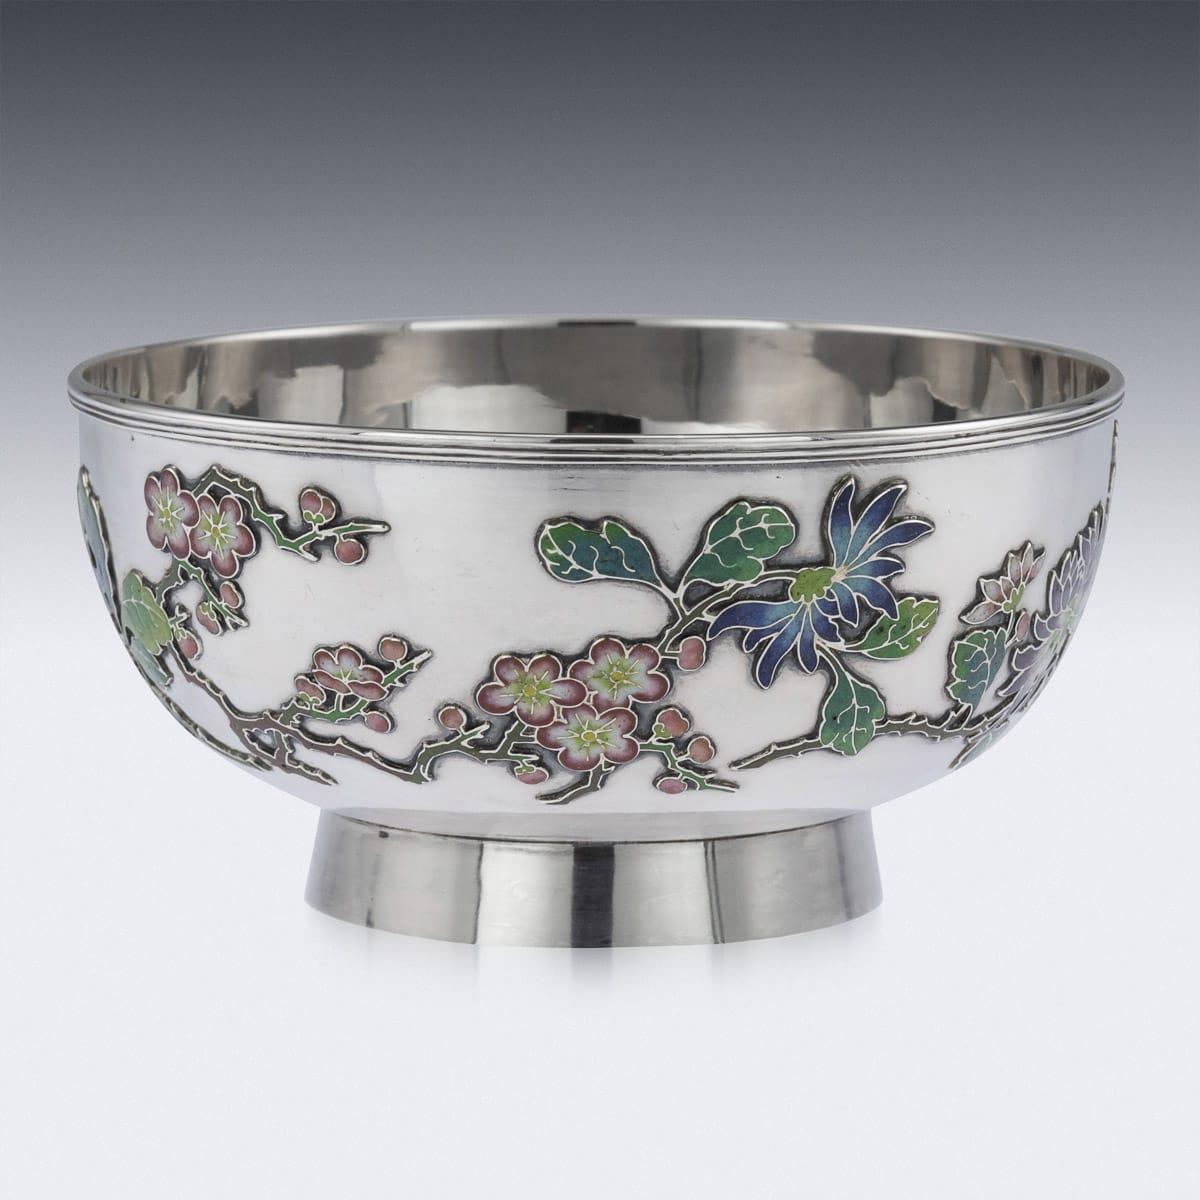 Antique late 19th century extremely rare Chinese export solid silver and enamel bowl, the sides are applied with shaded enamels, depicting blooming chrysanthemums and cherry blossom on polished ground. The bowl is of good traditional size and